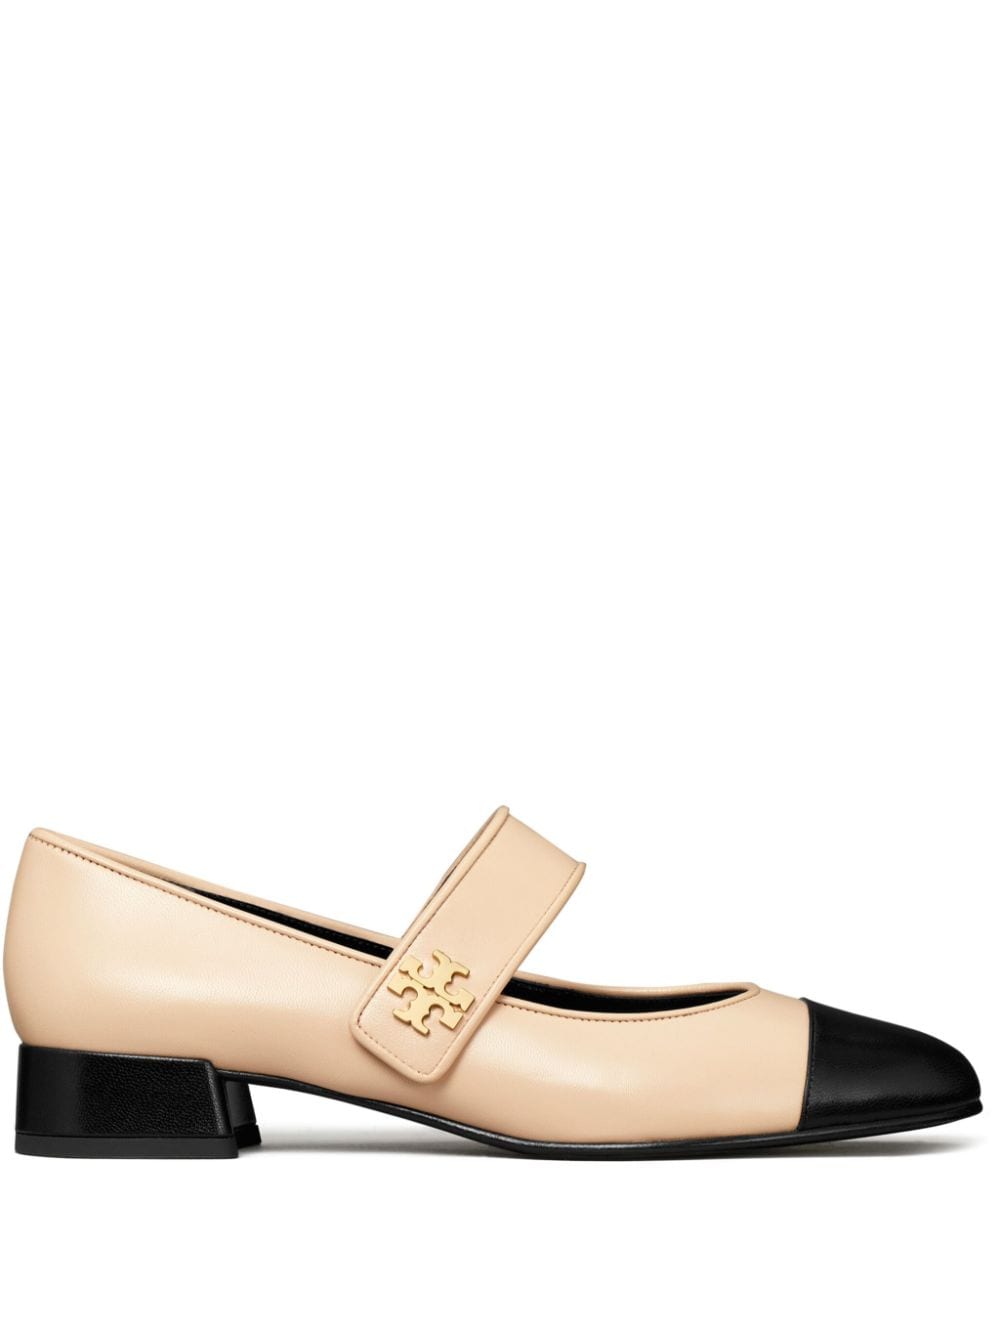 Tory Burch Mary Jane 25mm Shoes In Pink